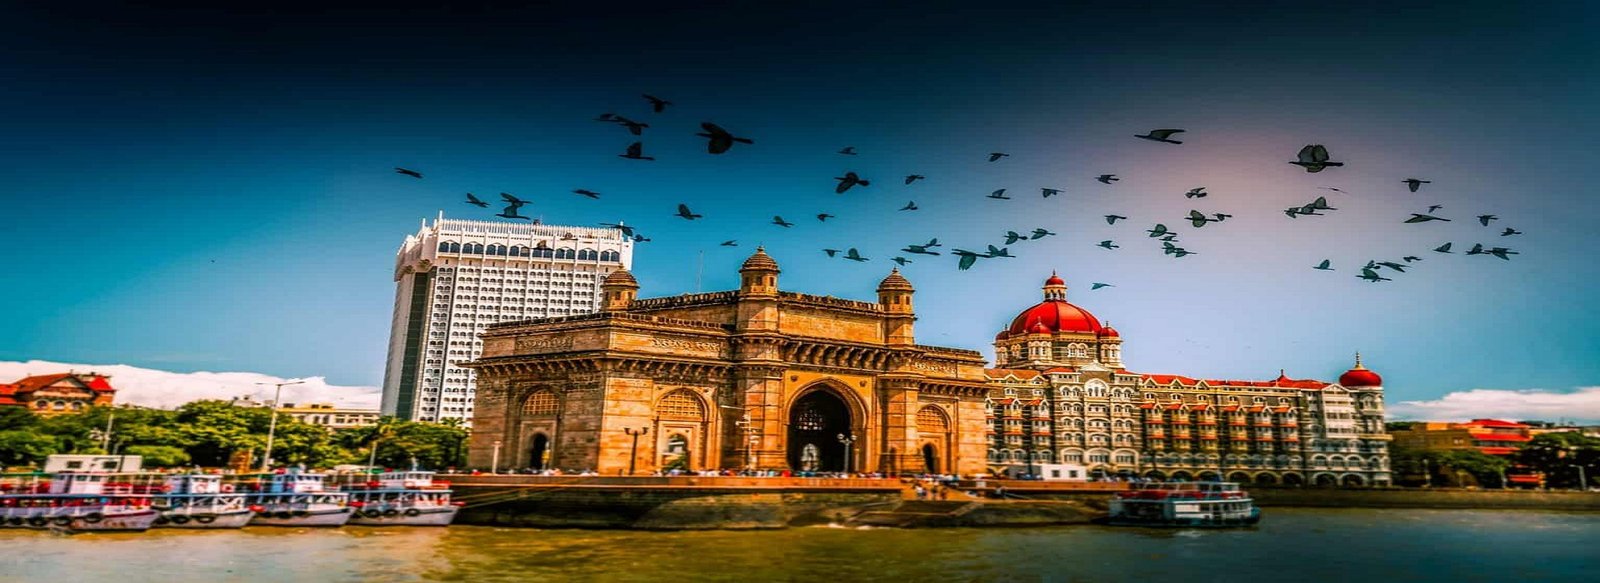 Beautiful Cities To Visit In India